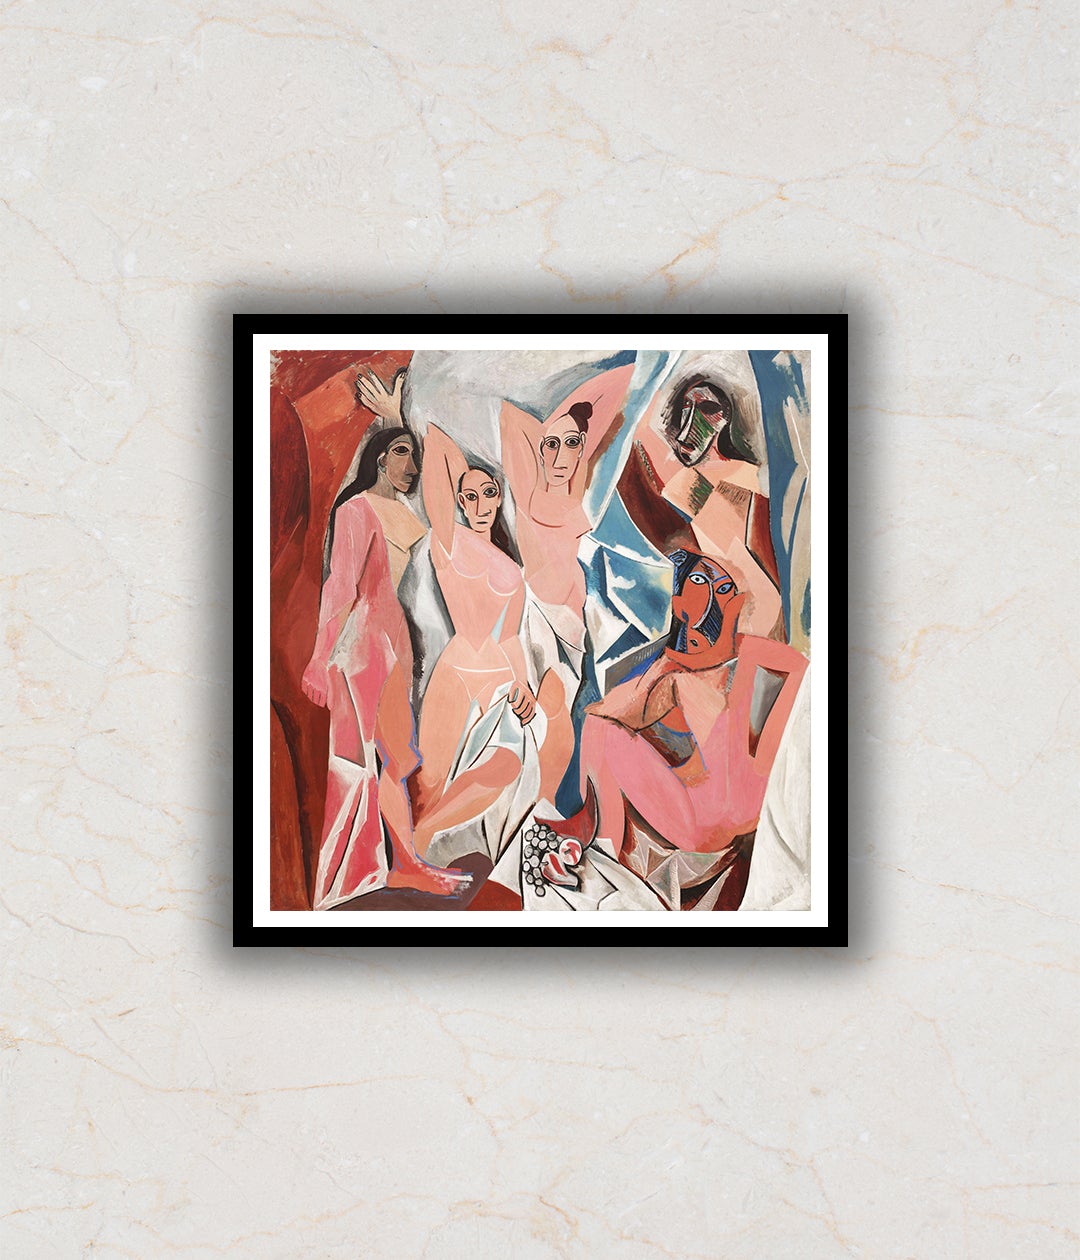 Les Demoiselles d'avignon Modern Abstract Painting Artwork For Home Wall DŽcor by Pablo Picasso